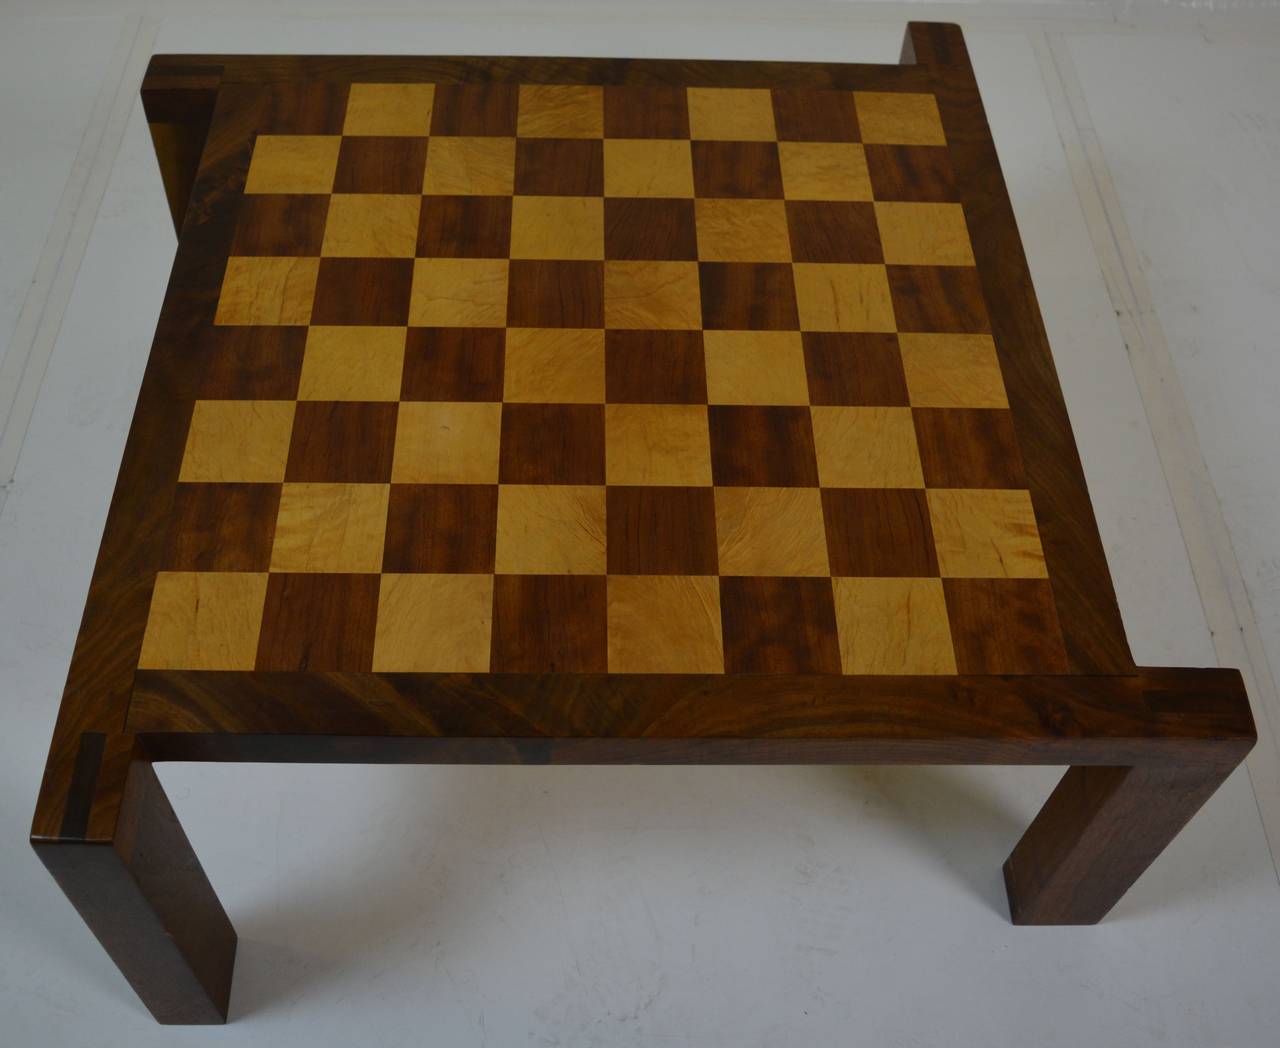 California Craft cocktail table and chess, checker board, circa 1970s. Quality craftsmanship of solid wood. Actual game table playing surface measures 27